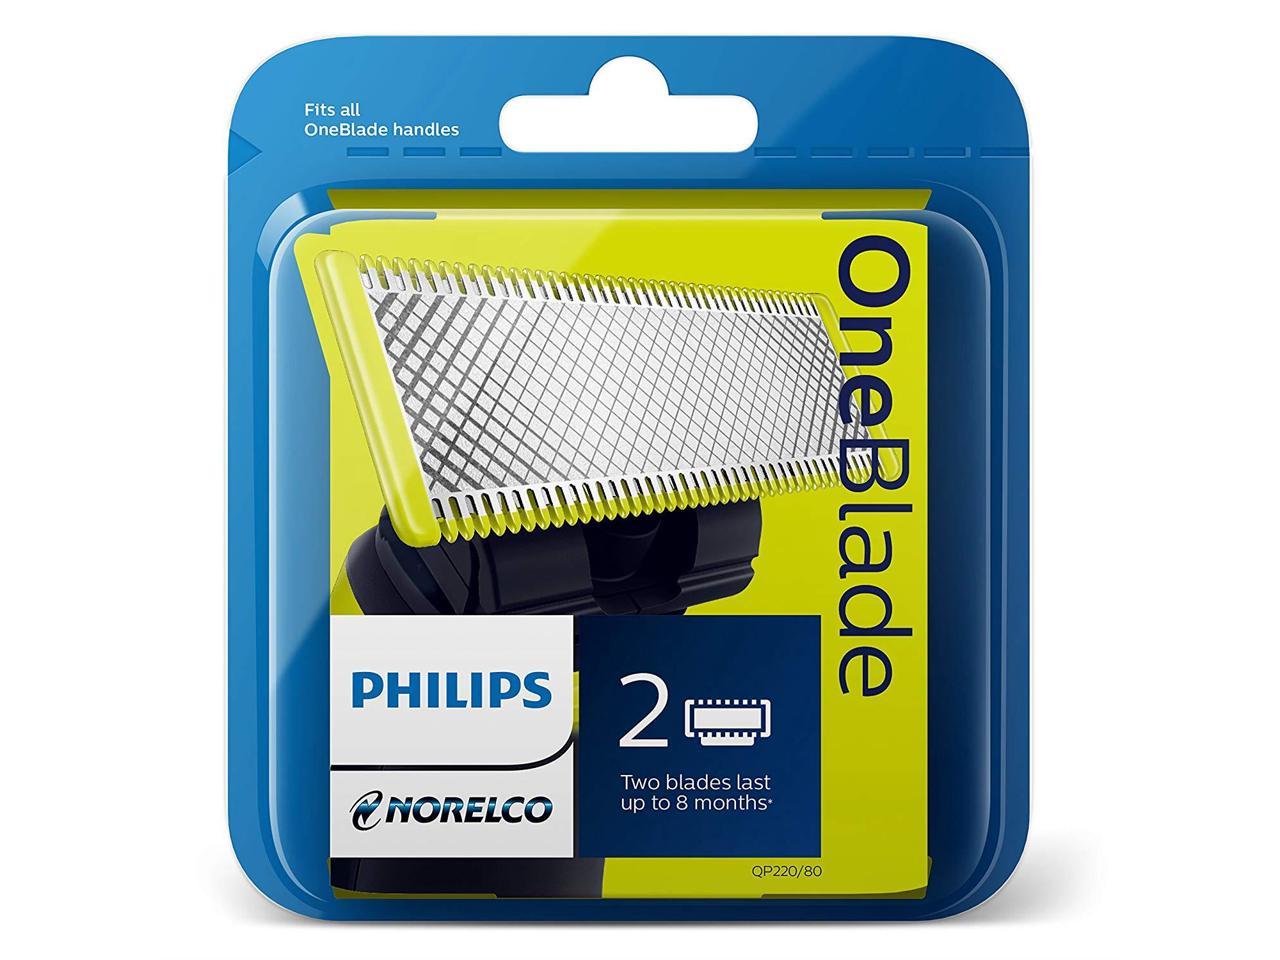 philips norelco one blade blades